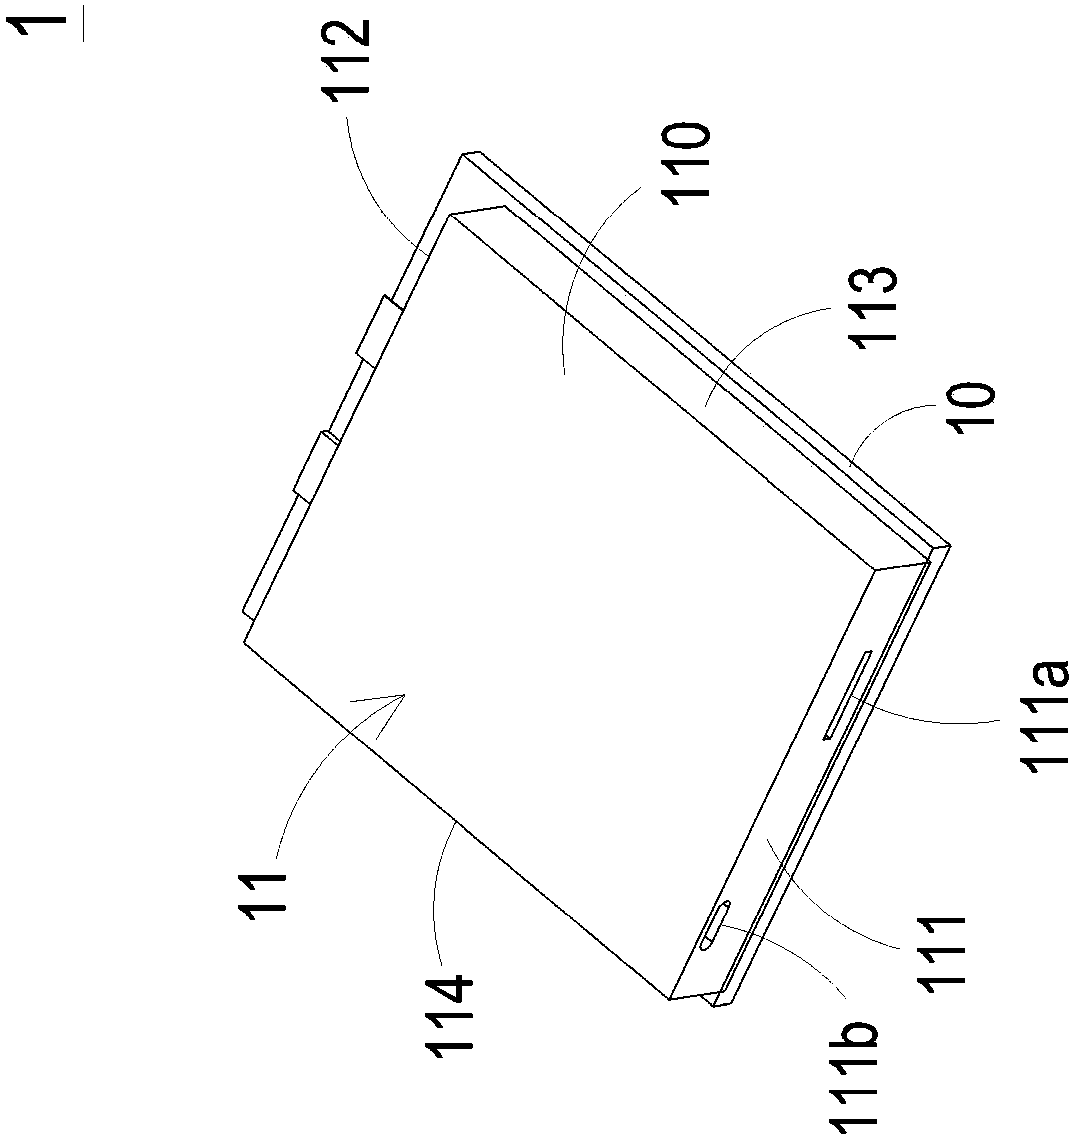 Actuation sensing device and suitable housing thereof